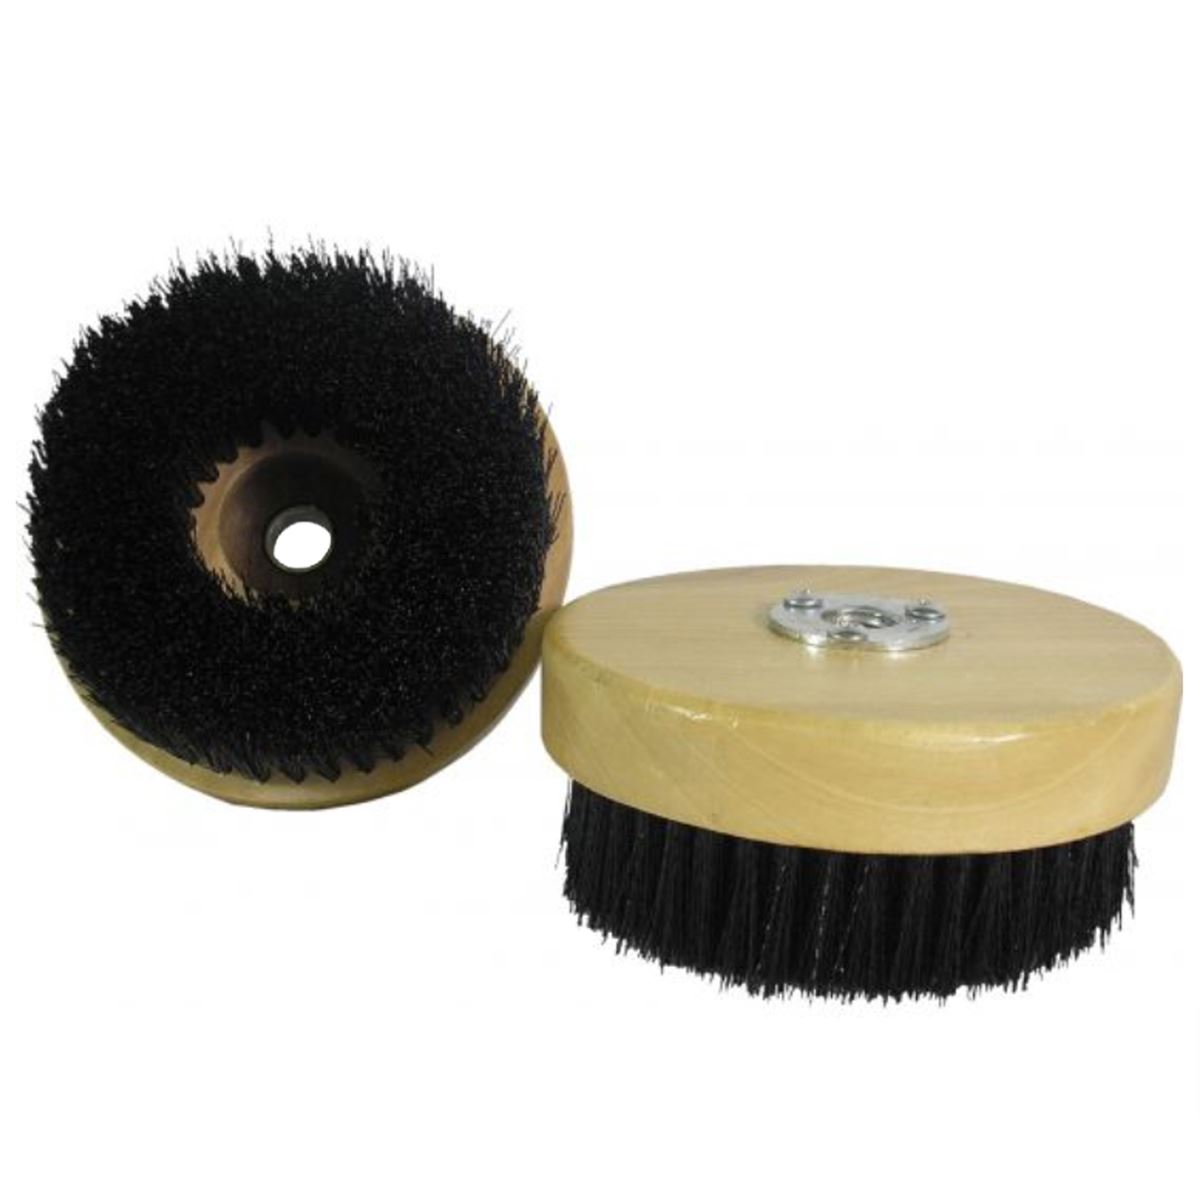 ROTARY DIRECT MOUNT UPHOLSTERY BRUSH. Professional Detailing Products,  Because Your Car is a Reflection of You